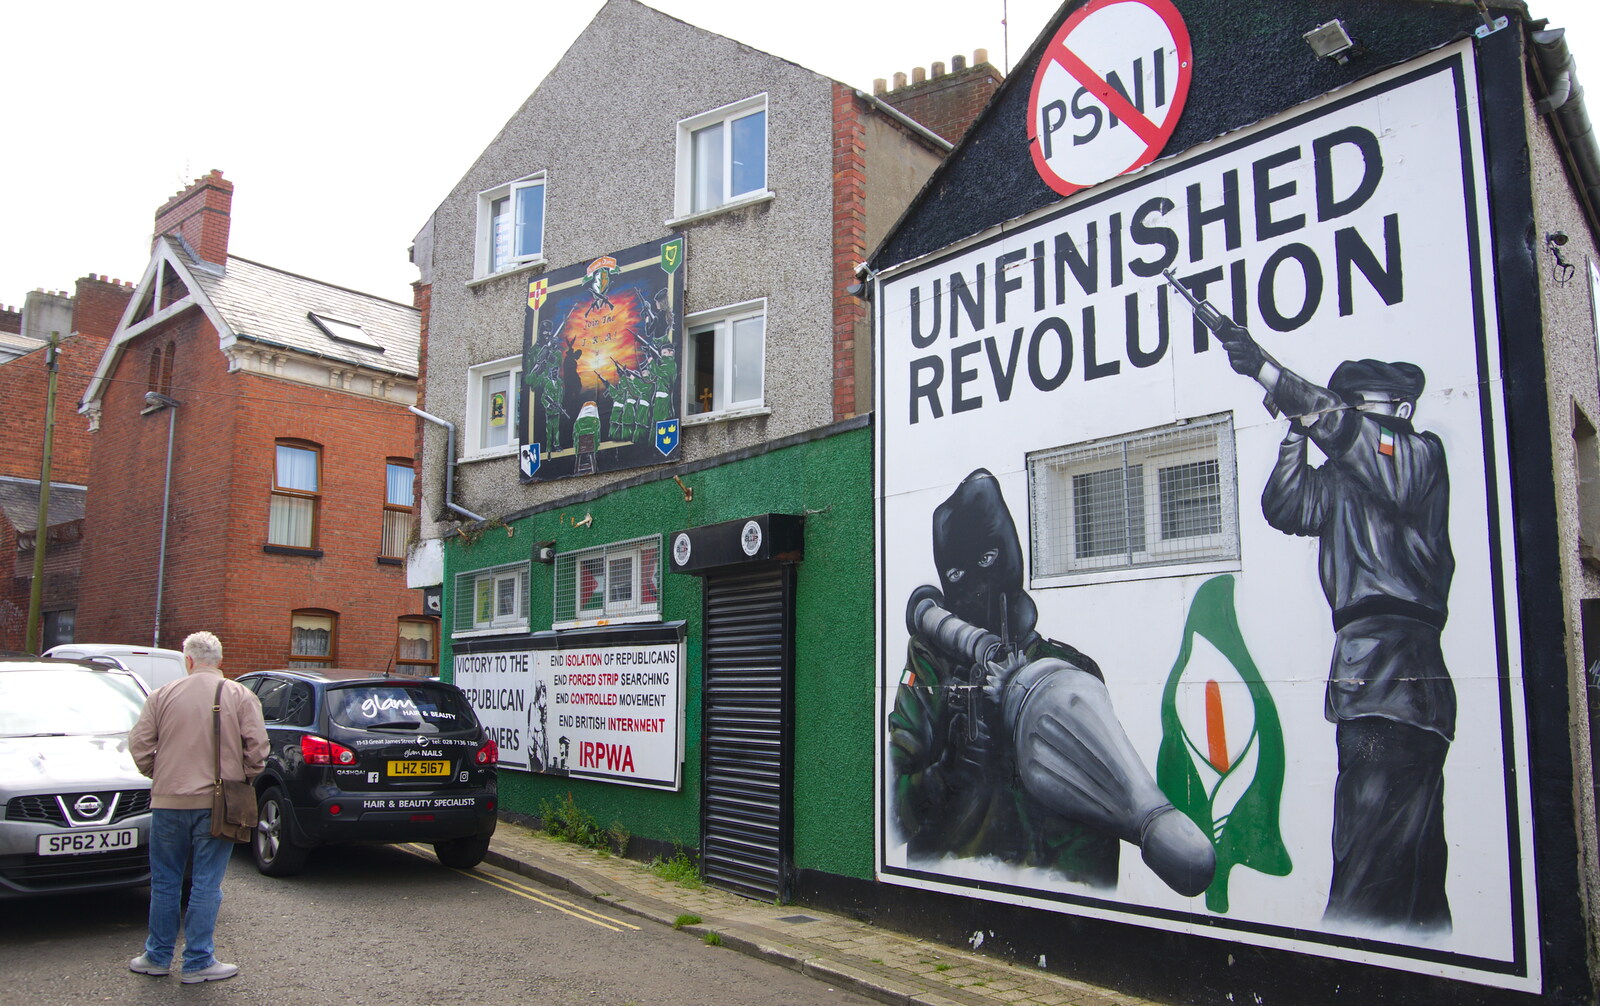 Some very Republican murals on Harvey Street from A Day in Derry, County Londonderry, Northern Ireland - 15th August 2019